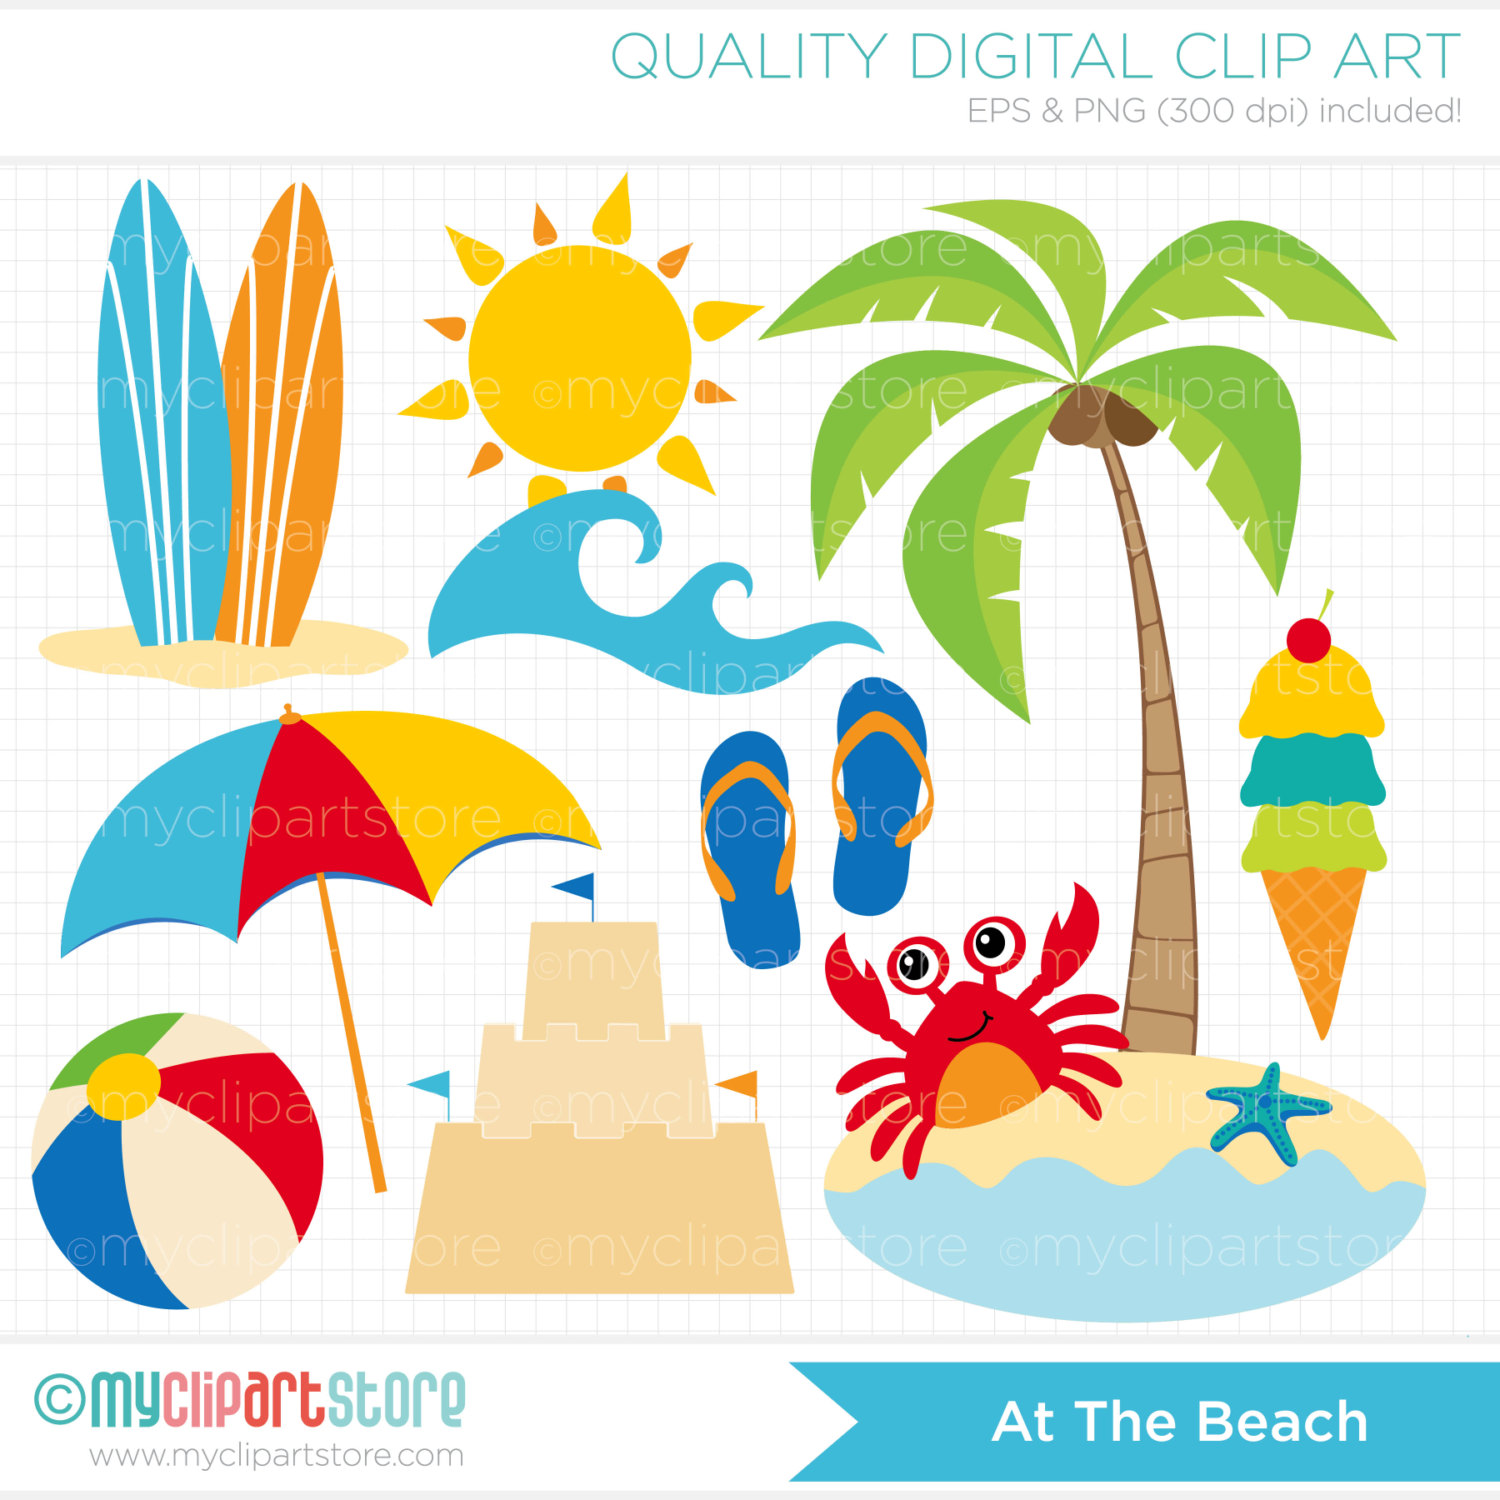 Summer Clipart   A Day At The Beach Clipart   By Myclipartstore